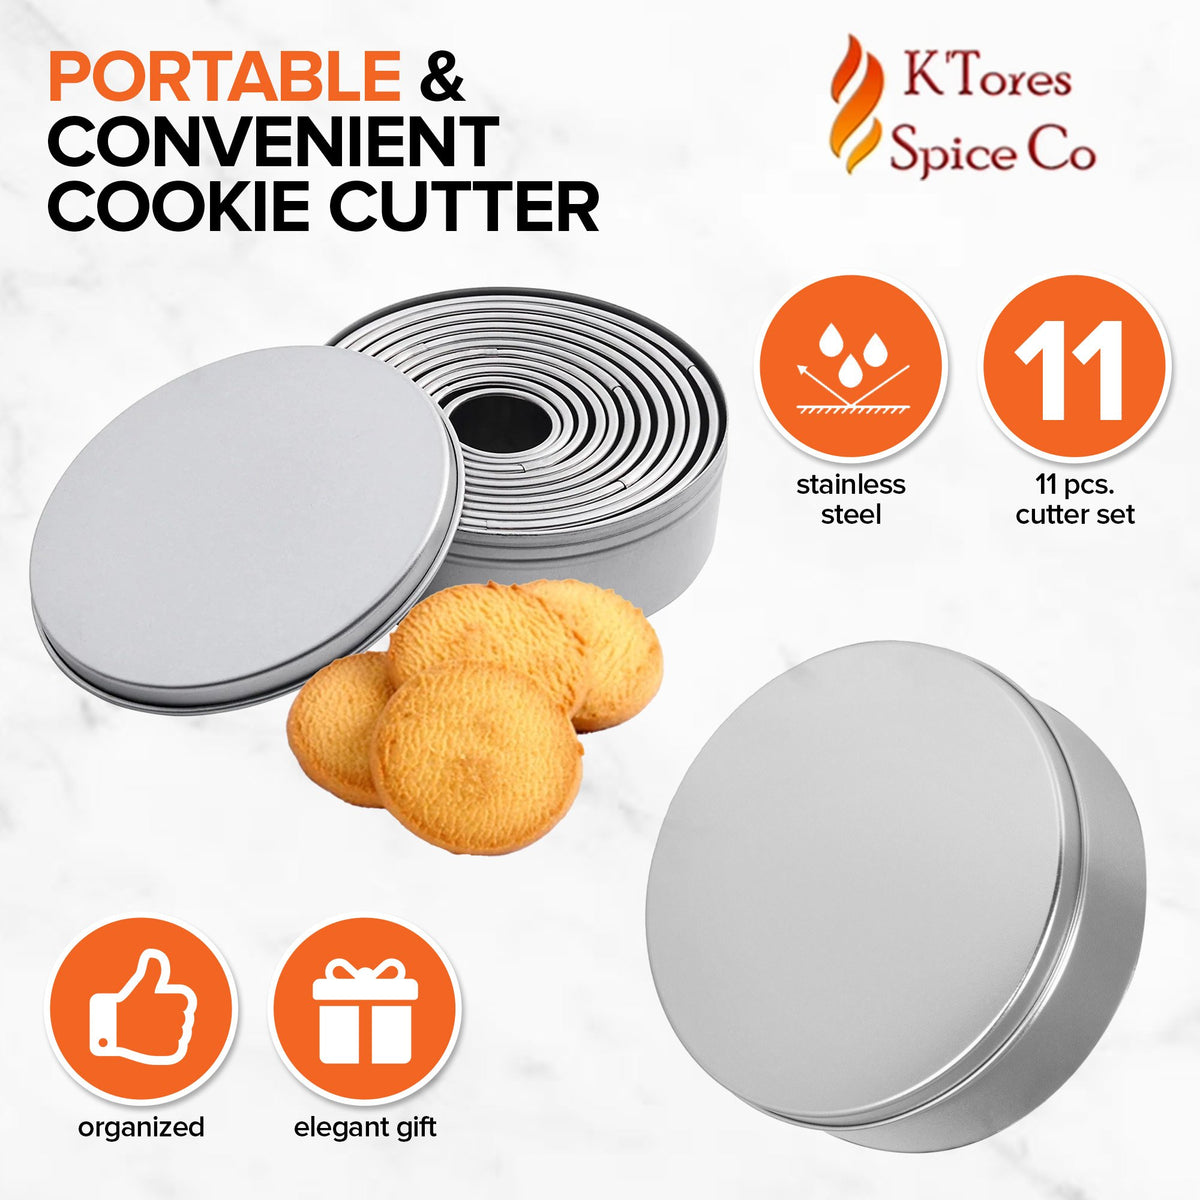 K-Tores Stainless Steel, Round - Cookie Cutters Baking Pastry Cutter Set - Strong Circle Biscuit, Cookie Cutter Set - 11 Cookie Cutter Sizes & Shapes -